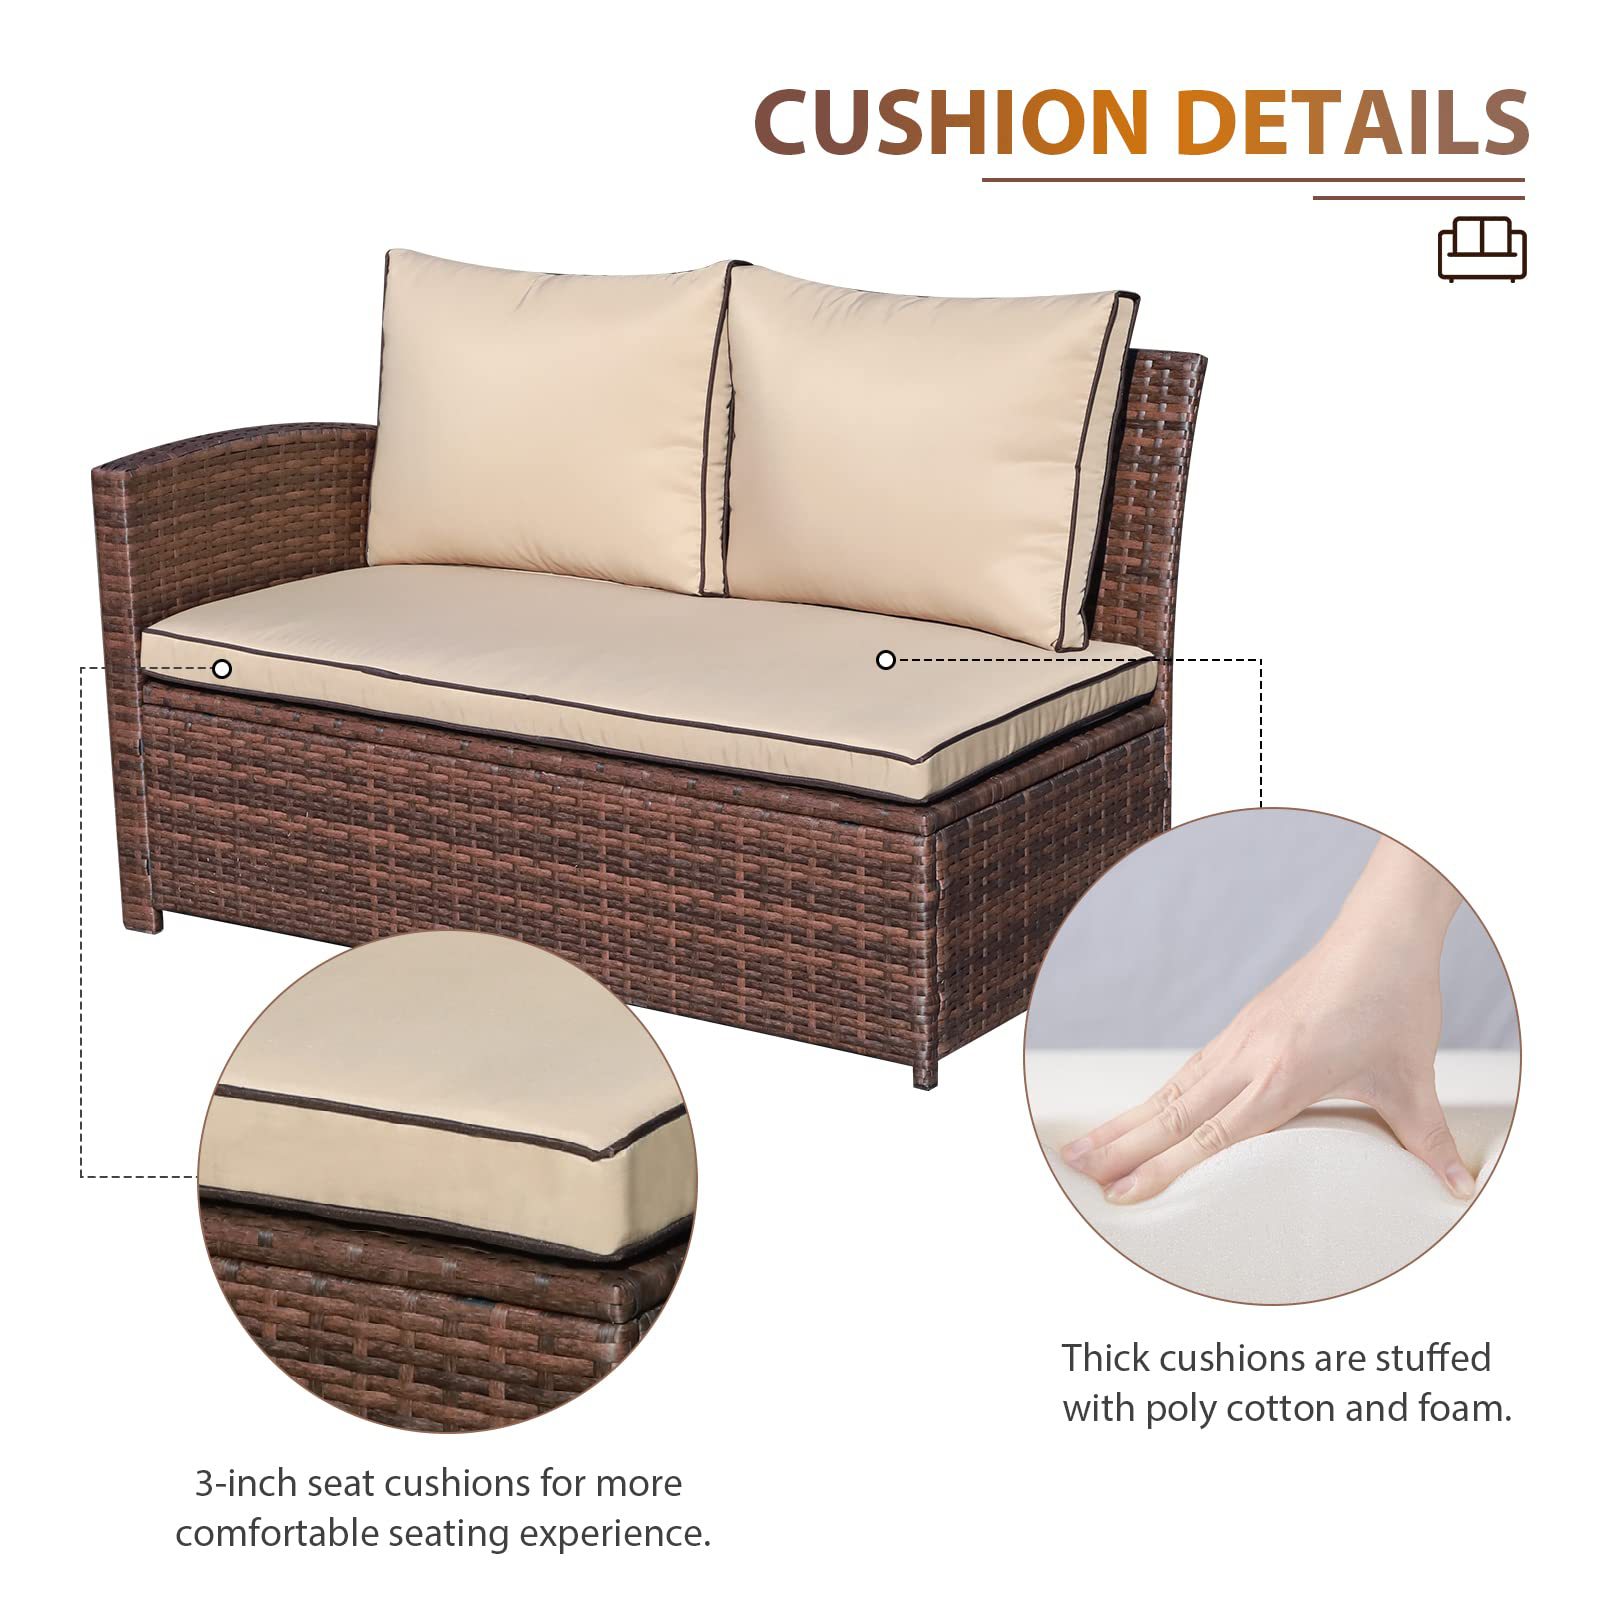 Outdoor Creative Design High Quality Backyard Couches Wicker Sectional Patio Furniture Sofa Set